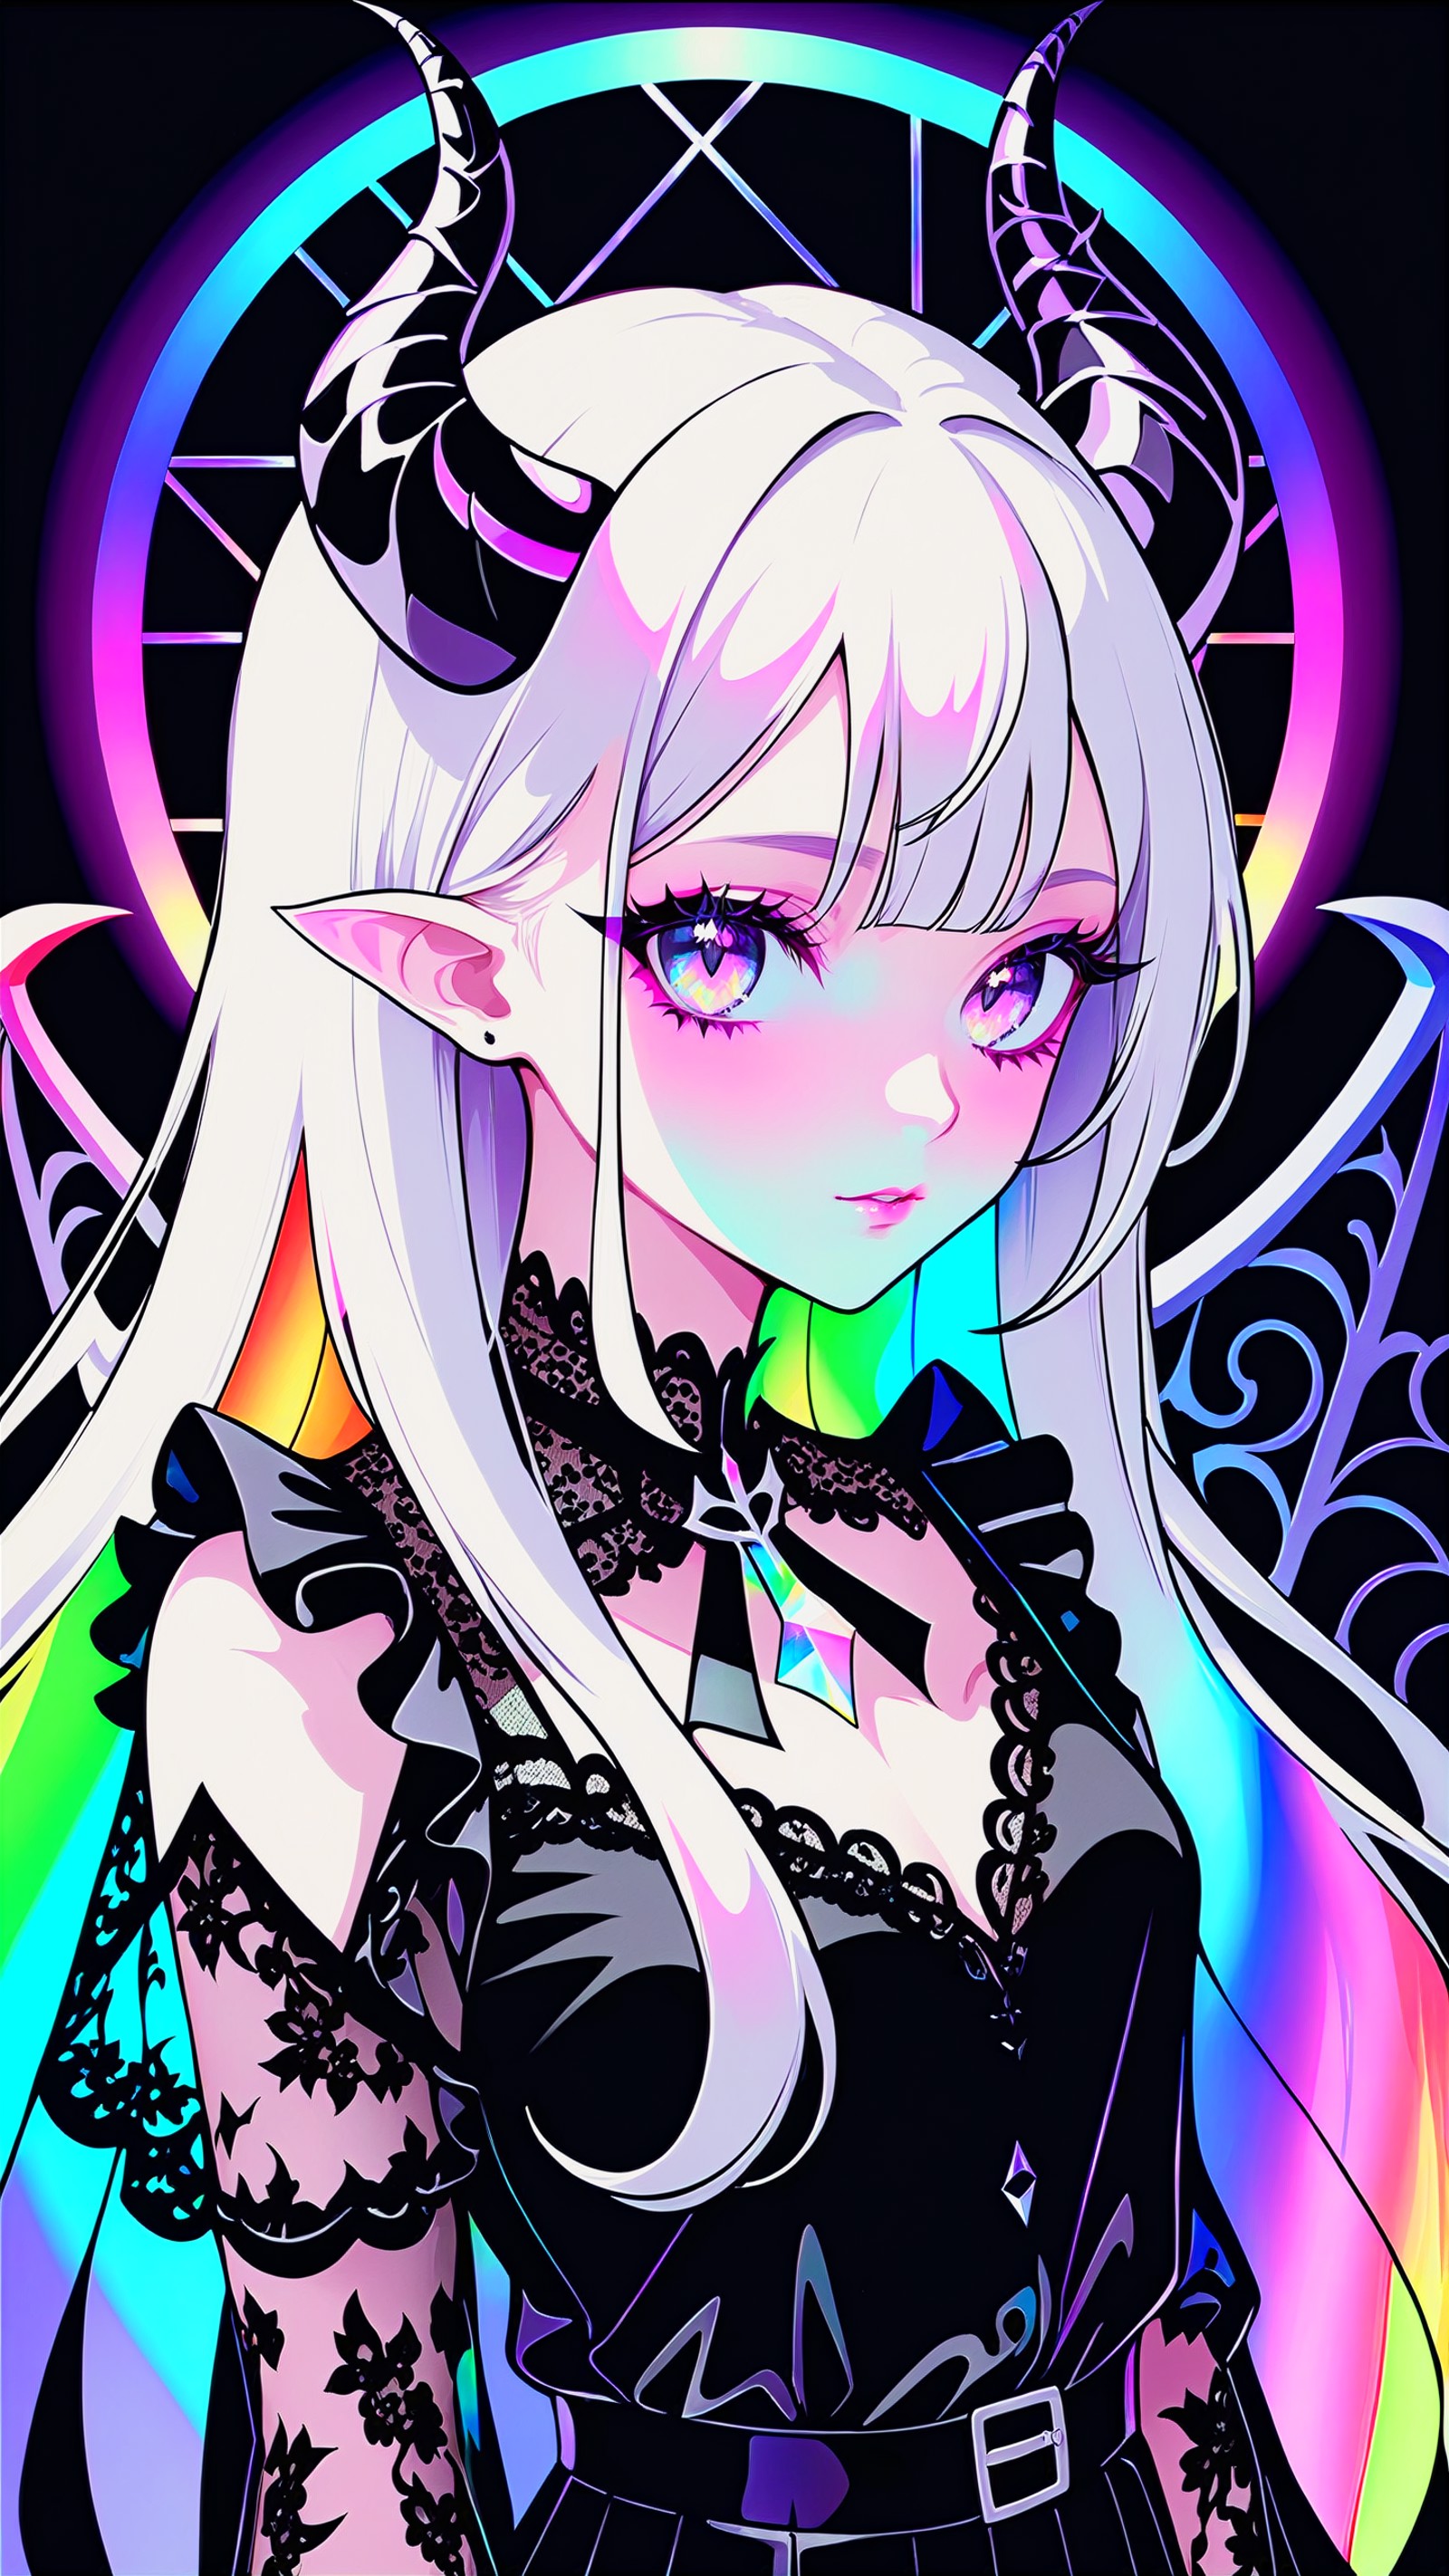 pale demon girl , prismatic coloring, holographic vibe, chromatic black lace blouse, gothic background, (long straight hor...